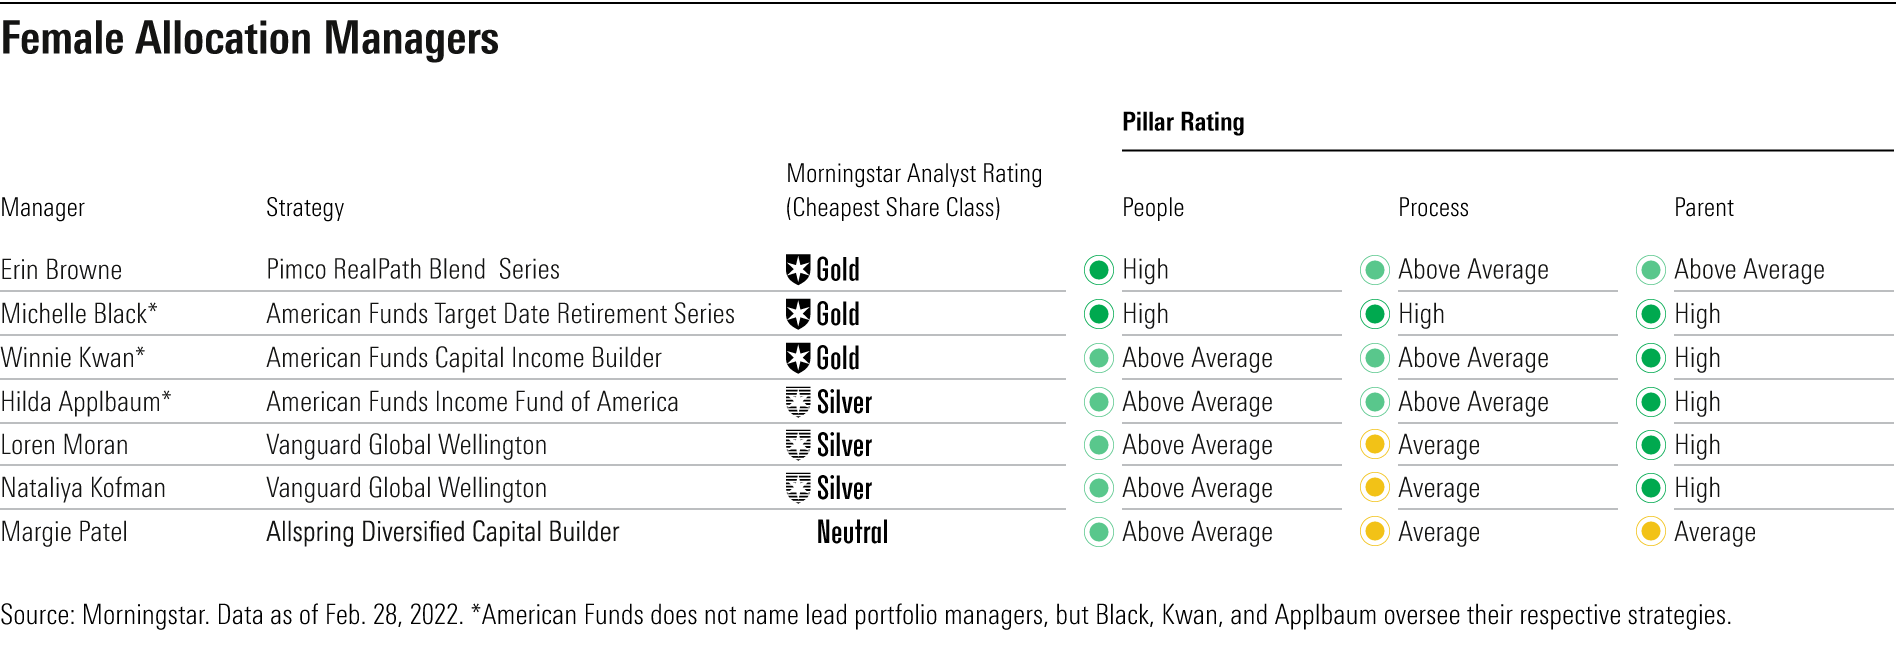 Lead female allocation managers or all-women management teams that earn a High or Above Average People Rating